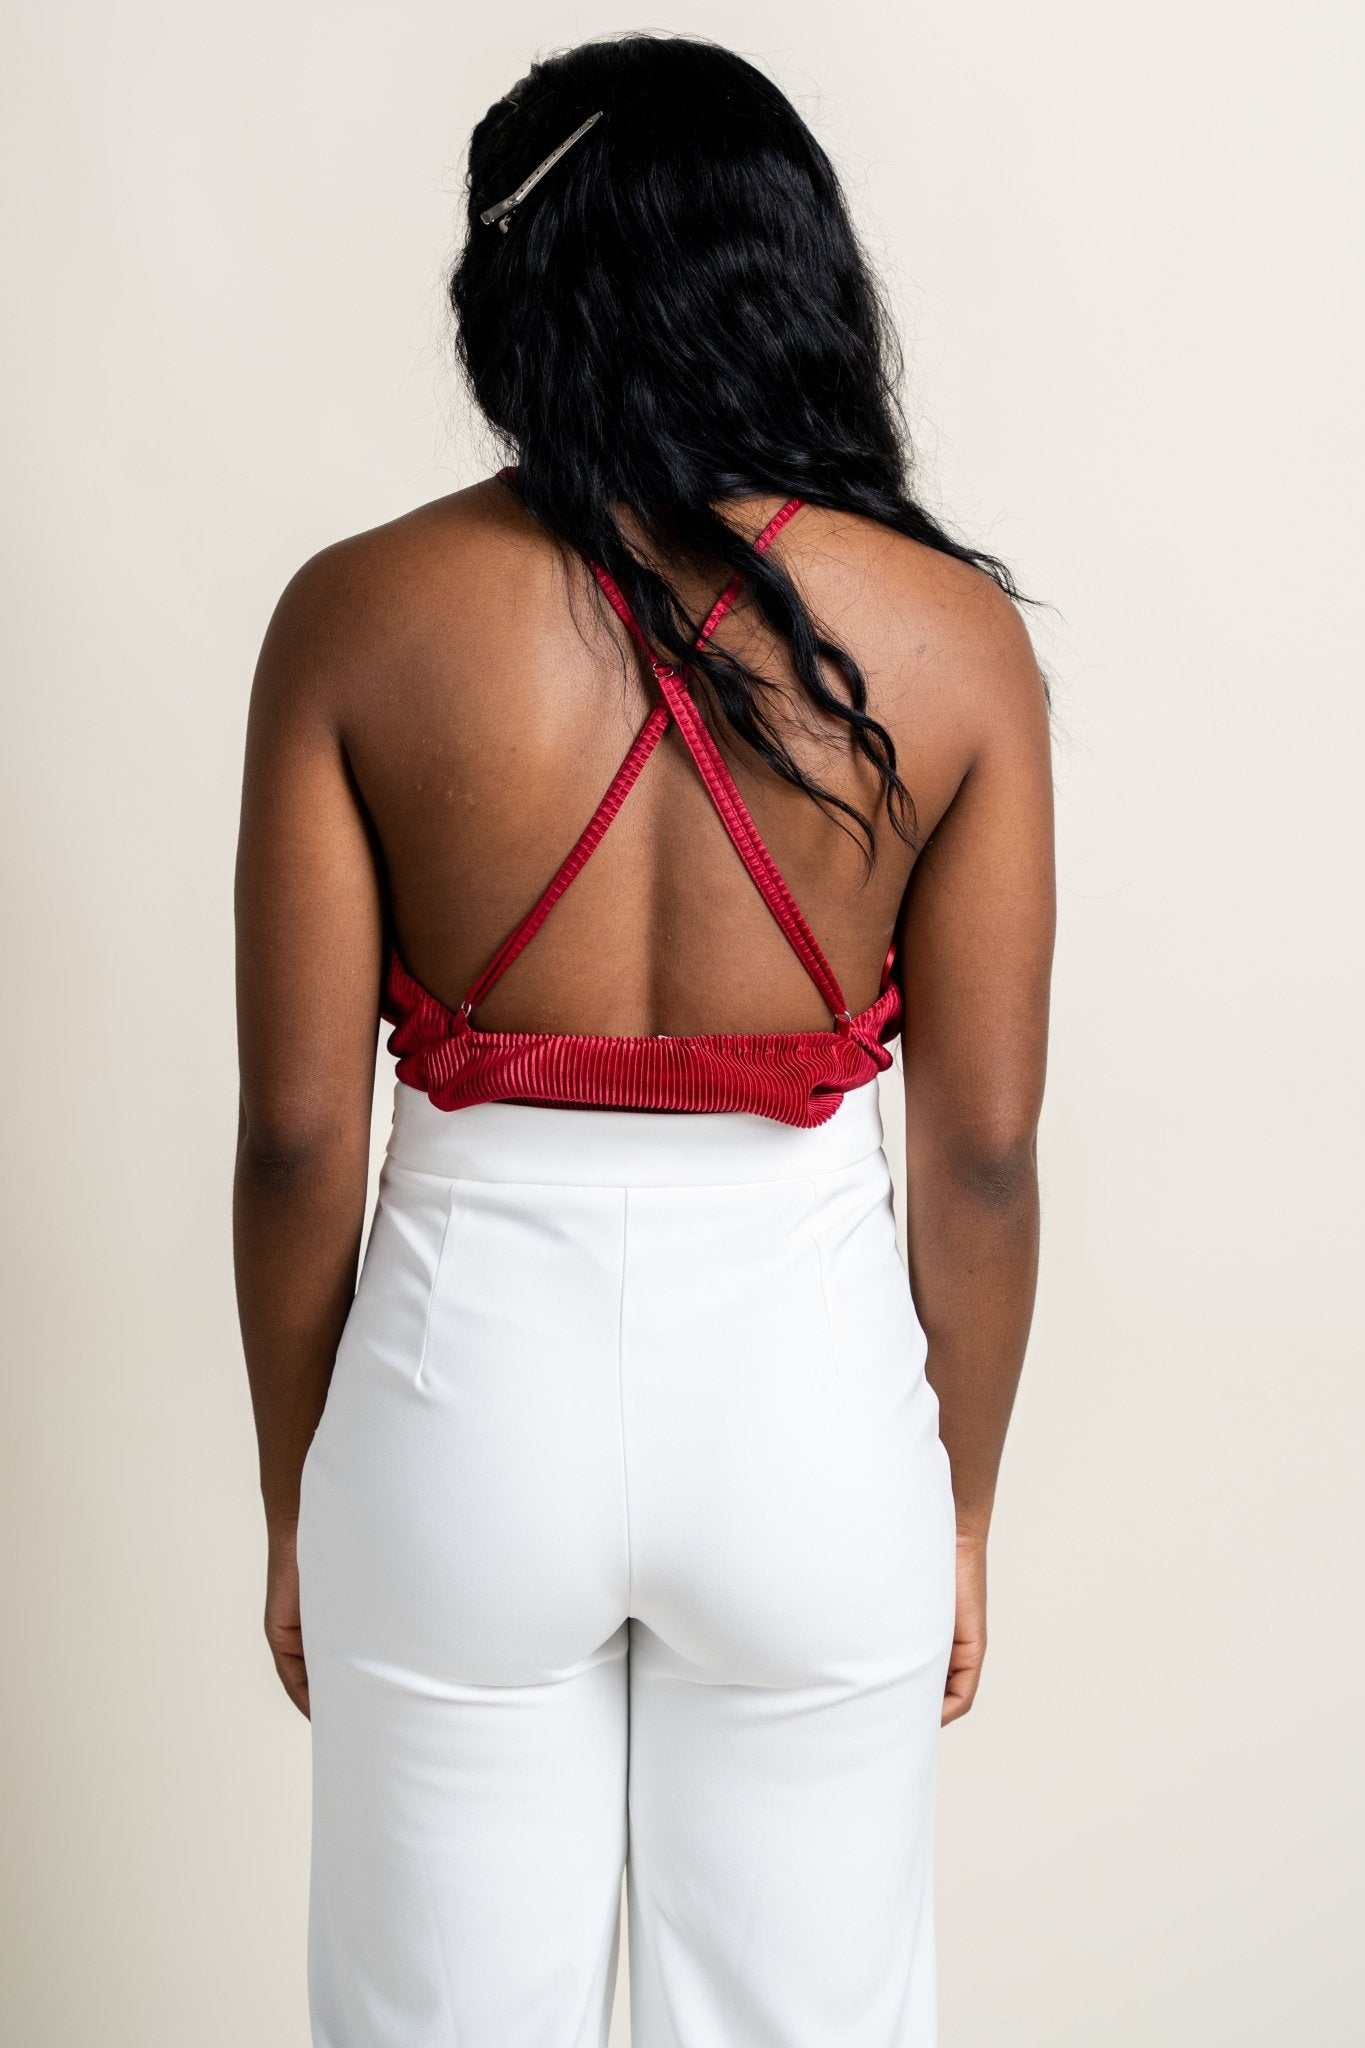 Textured v-neck bodysuit cherry red - Affordable bodysuit - Boutique Bodysuits at Lush Fashion Lounge Boutique in Oklahoma City